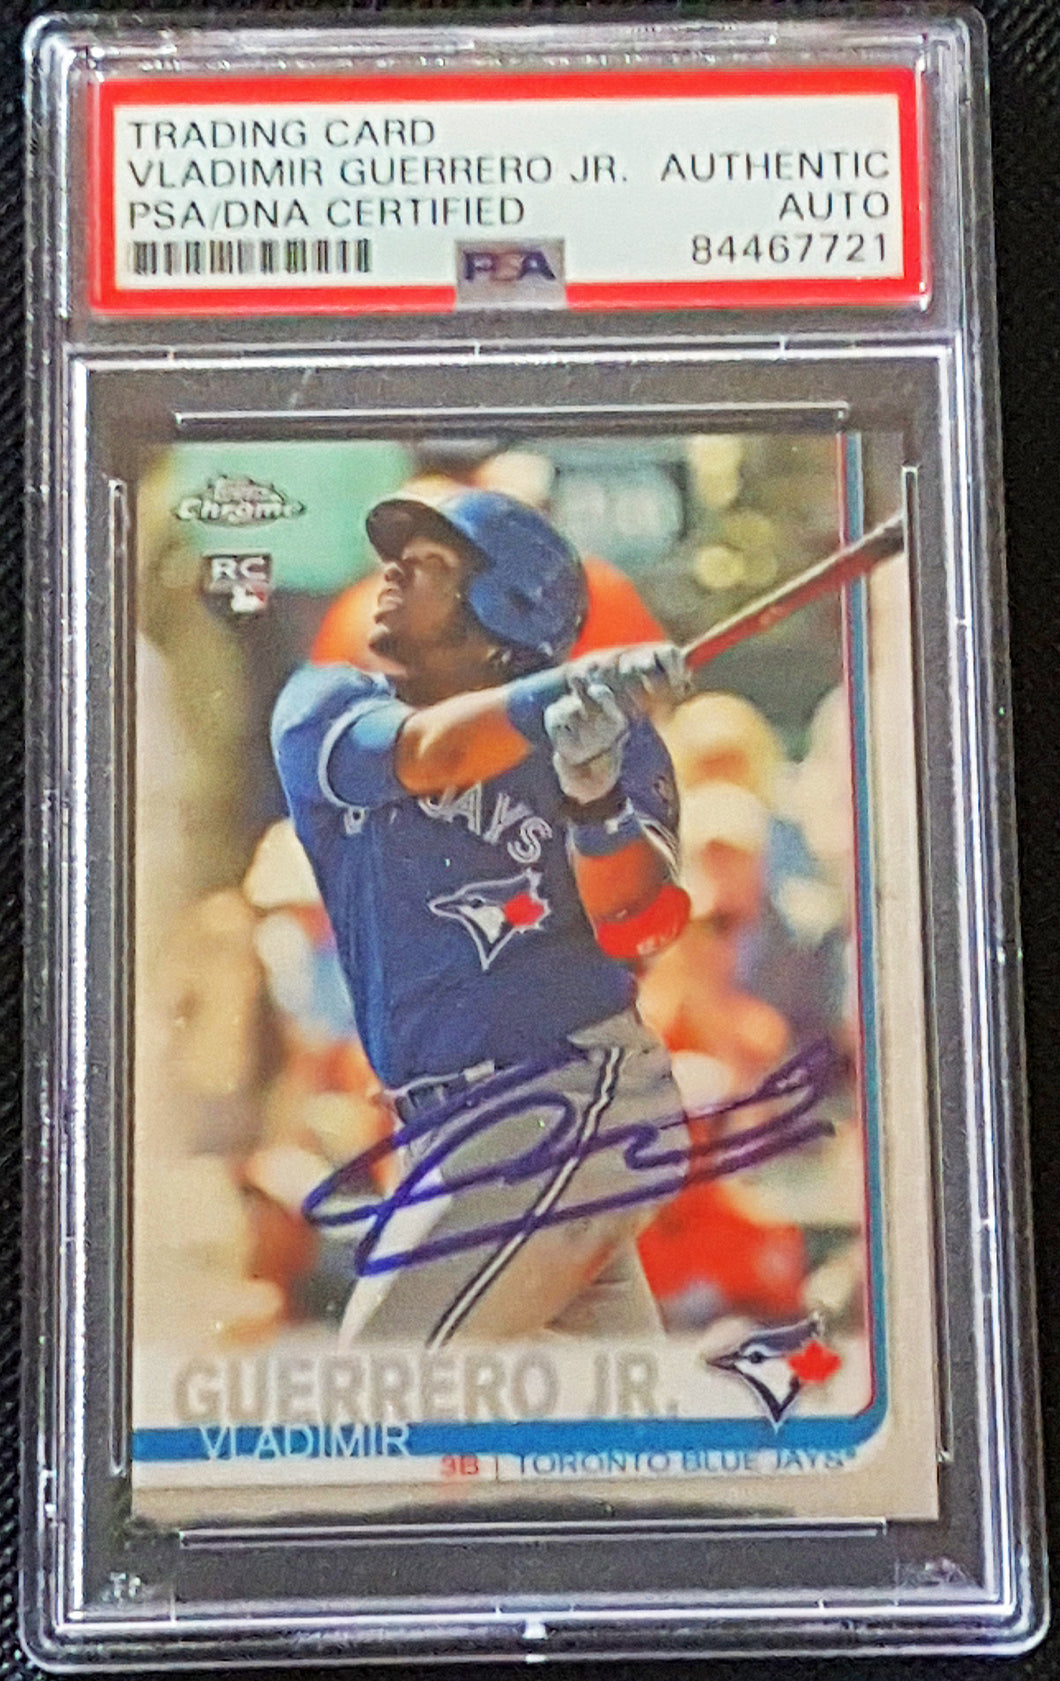 Topps Chrome Trading Card Vladimir Guerrero signed auto PSA / DNA Rookie RC